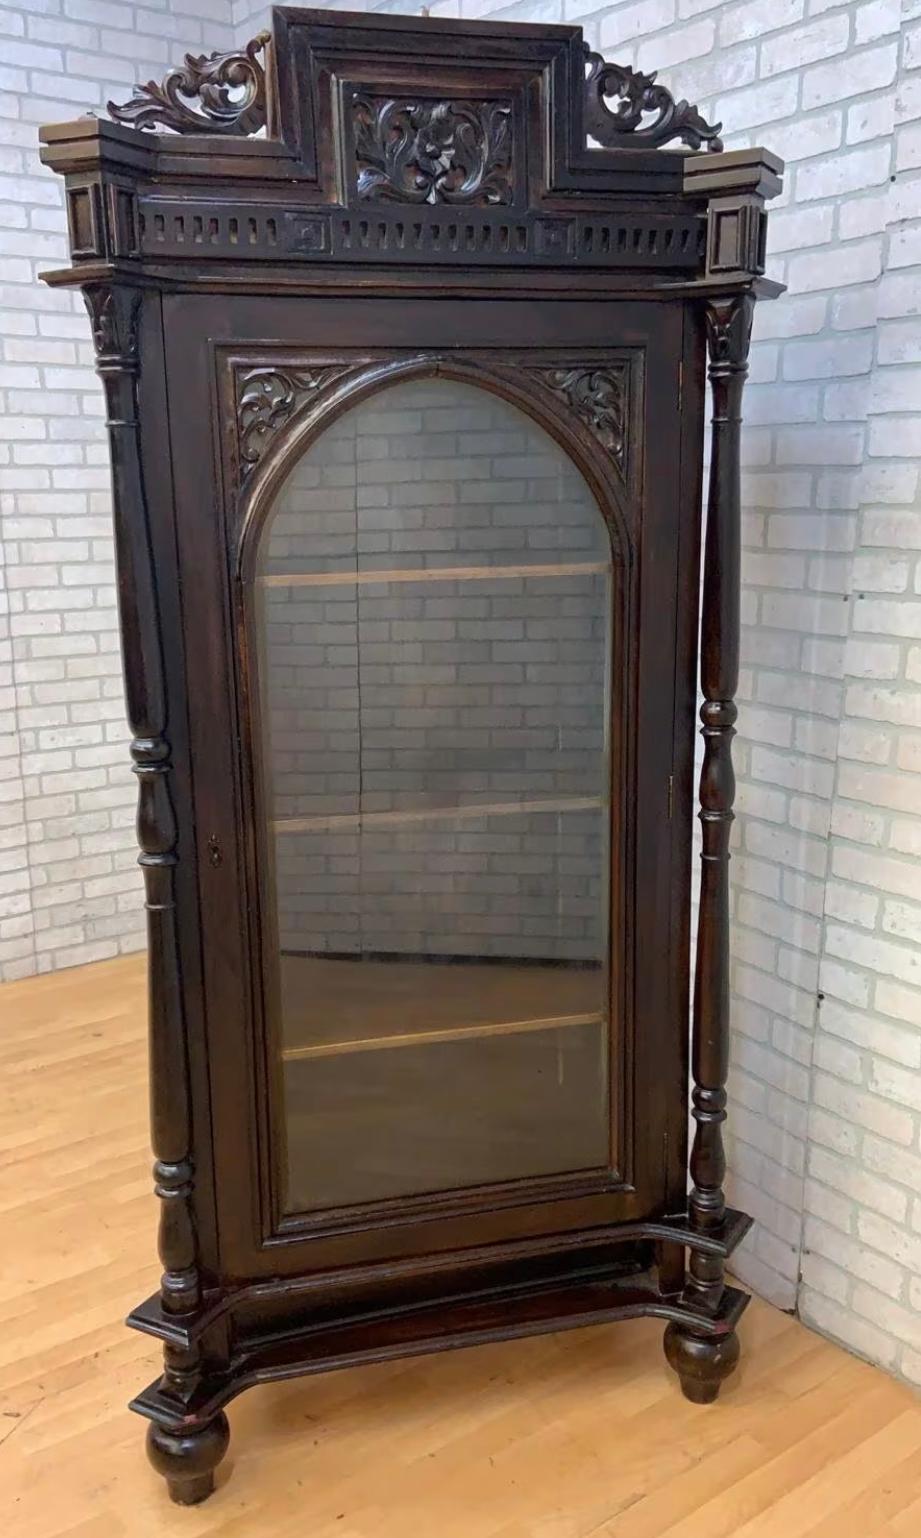 Antique French Carved Oak Glass Front Vitrine Display Cabinet

Gorgeous 19th Century French dark oak single glass front door vitrine/display cabinet. Beautifully crafted with finely carved scrolled acanthus leaf accents and trim, a single door with